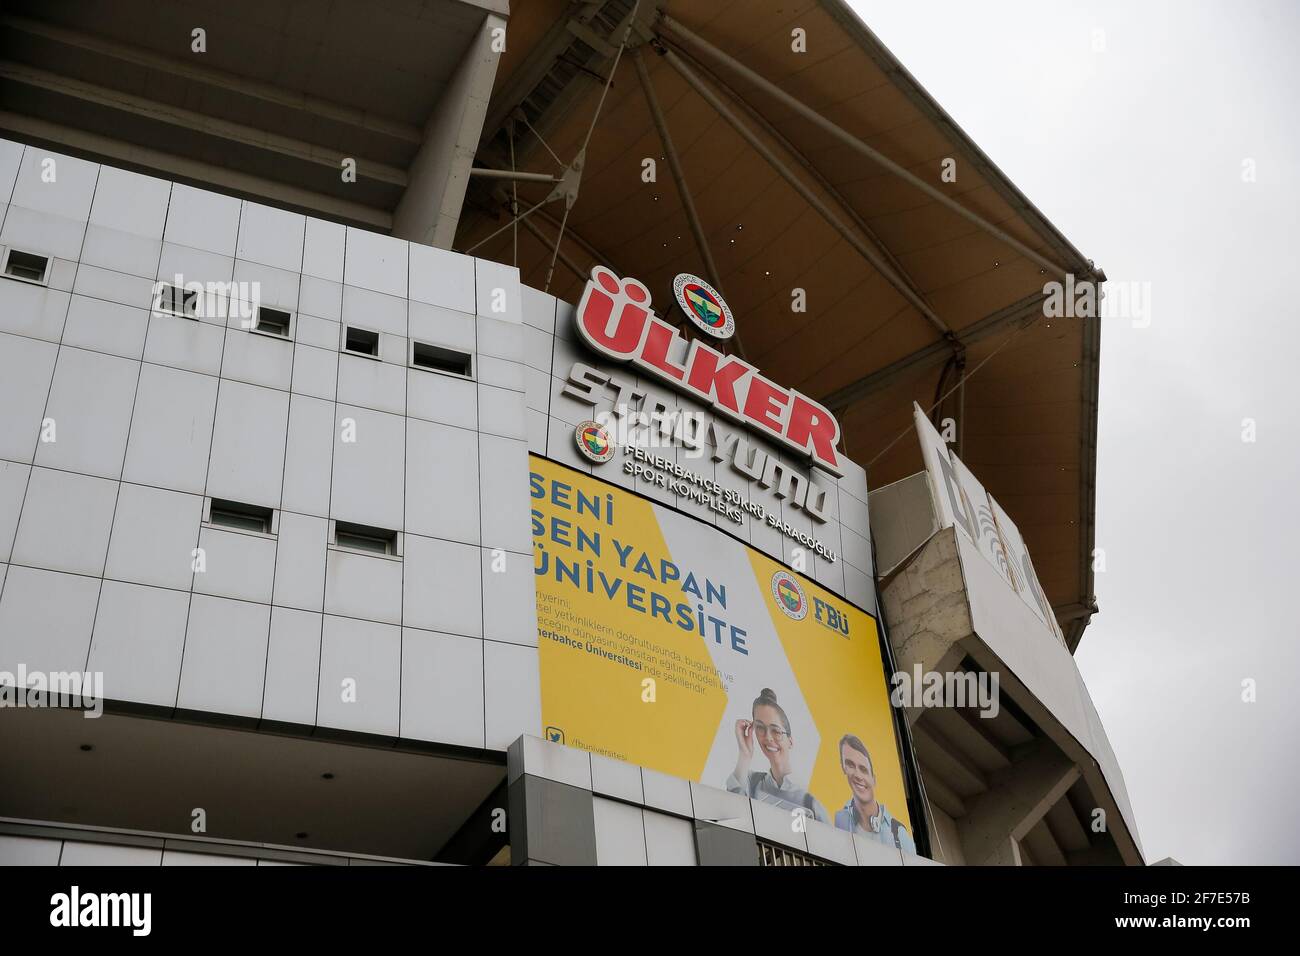 ISTANBUL, TURKEY - APRIL 5: outside view of Sukru Saracoglu Stadium home  stadium of Fenerbahce SK during the Super Lig match between Fenerbahce SK  and Stock Photo - Alamy